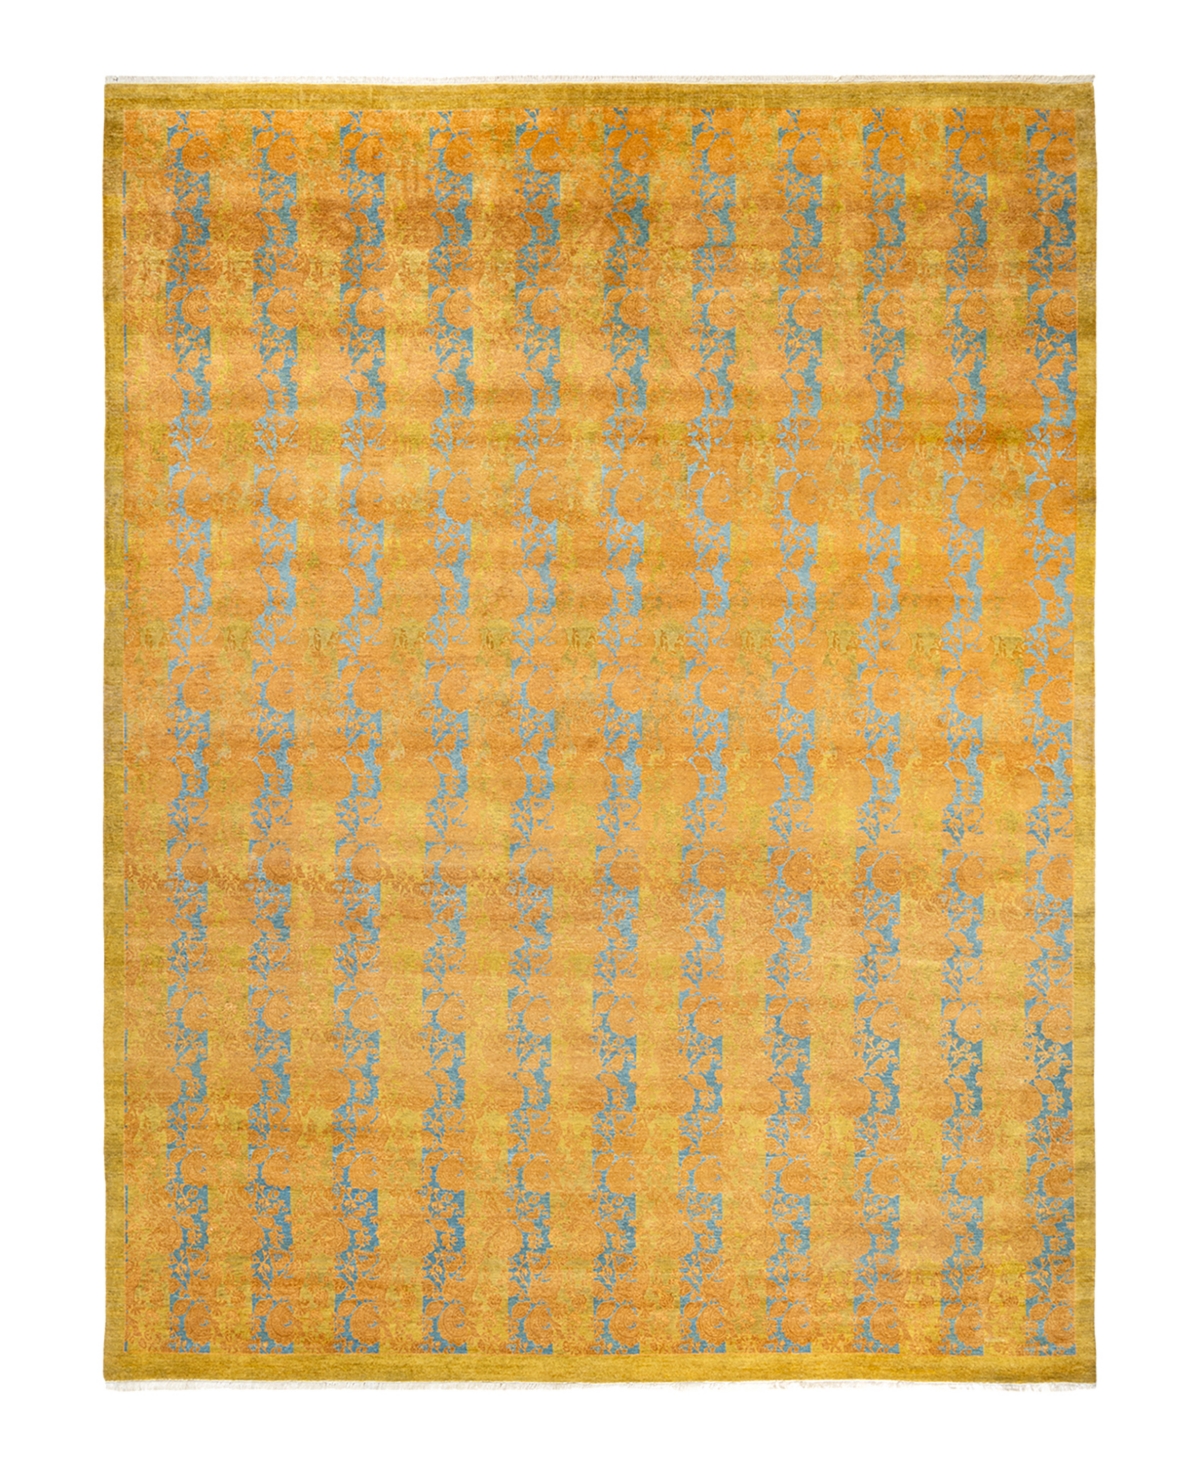 Adorn Hand Woven Rugs Mogul M1611 9'3in x 12'3in Area Rug - Yellow